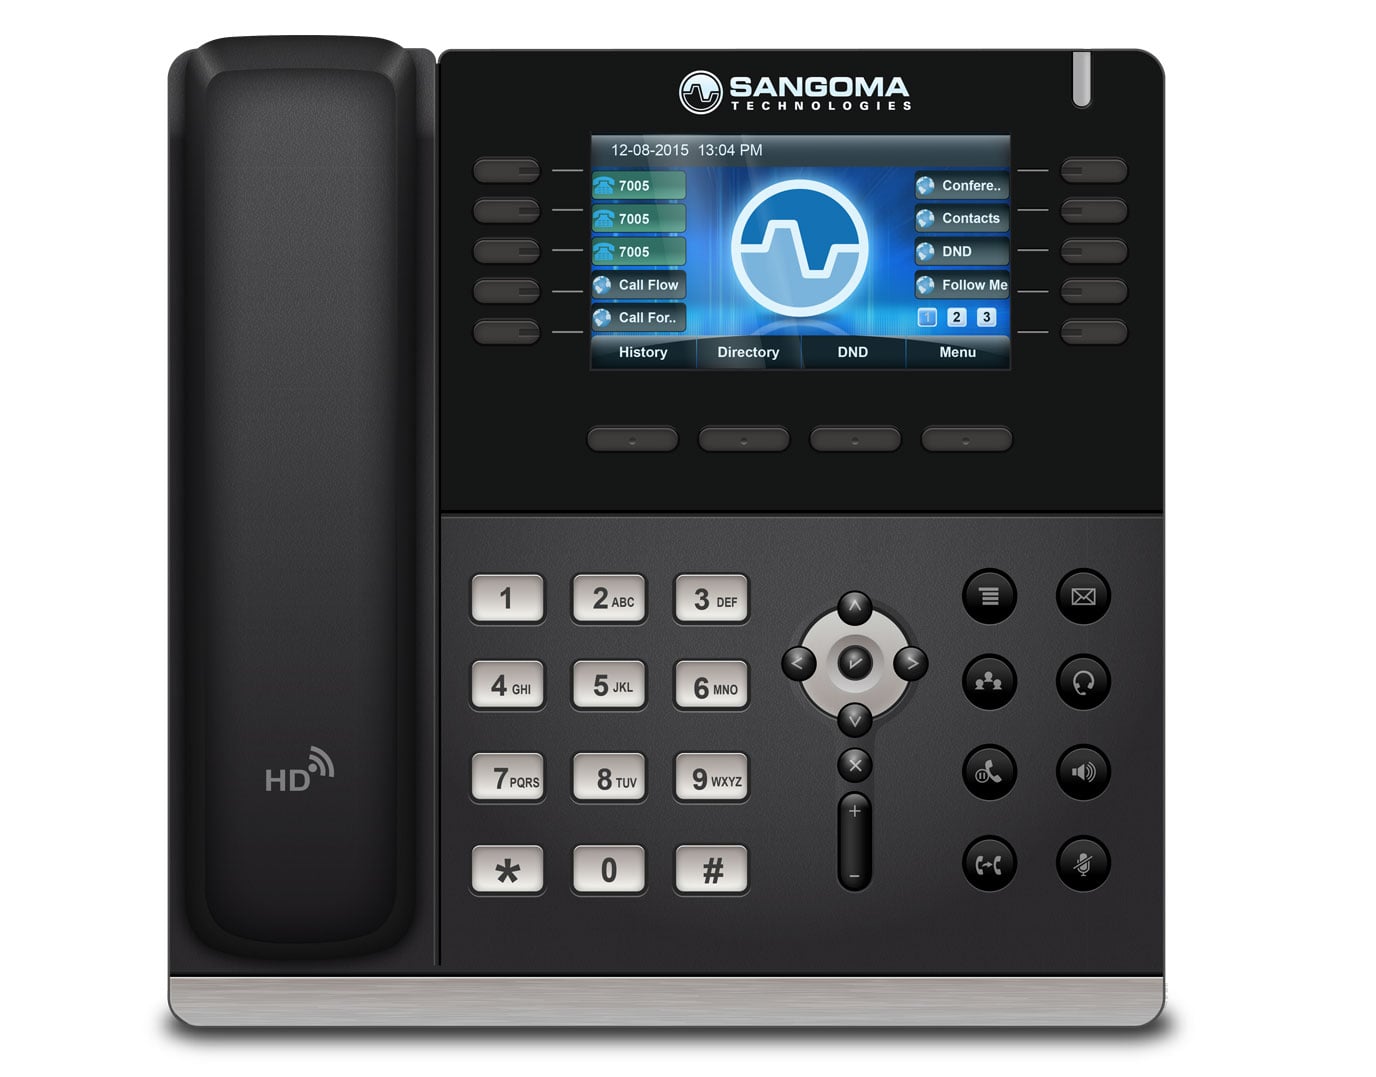 Sangoma S700 Large 4.3" Color Screen 45 Key VoIP Phone